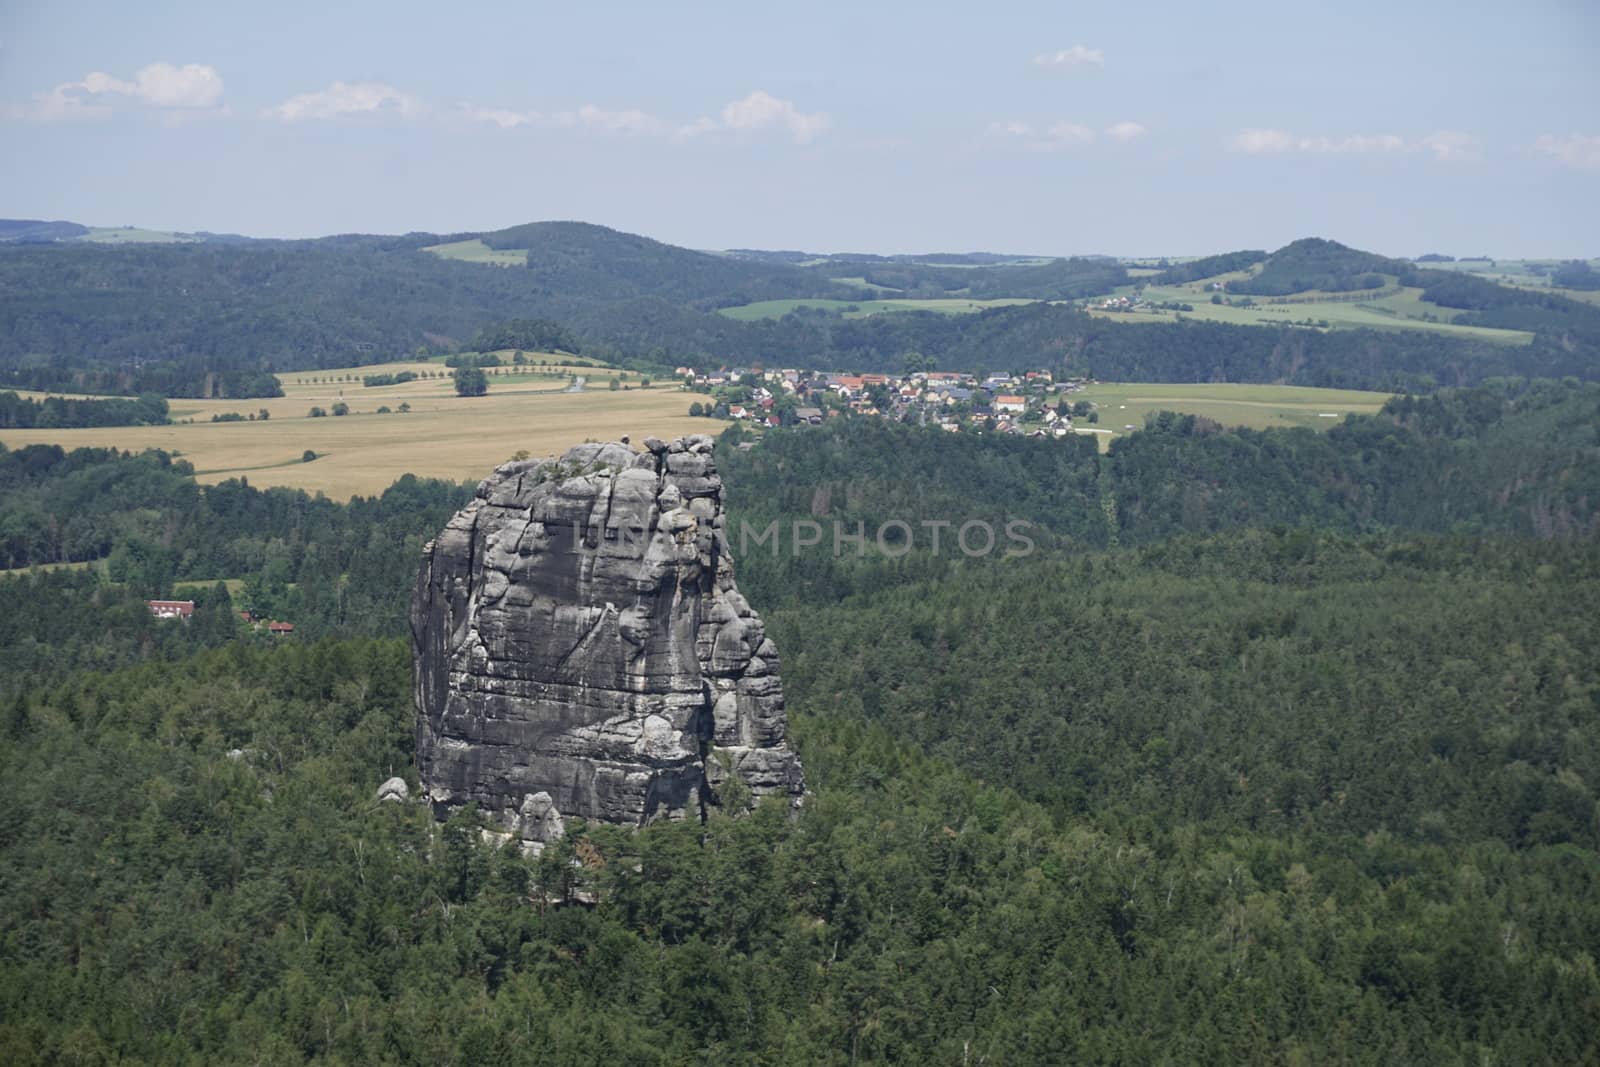 View to the Falkenstein mountain and over green hills in Saxon Switzerland, Germany